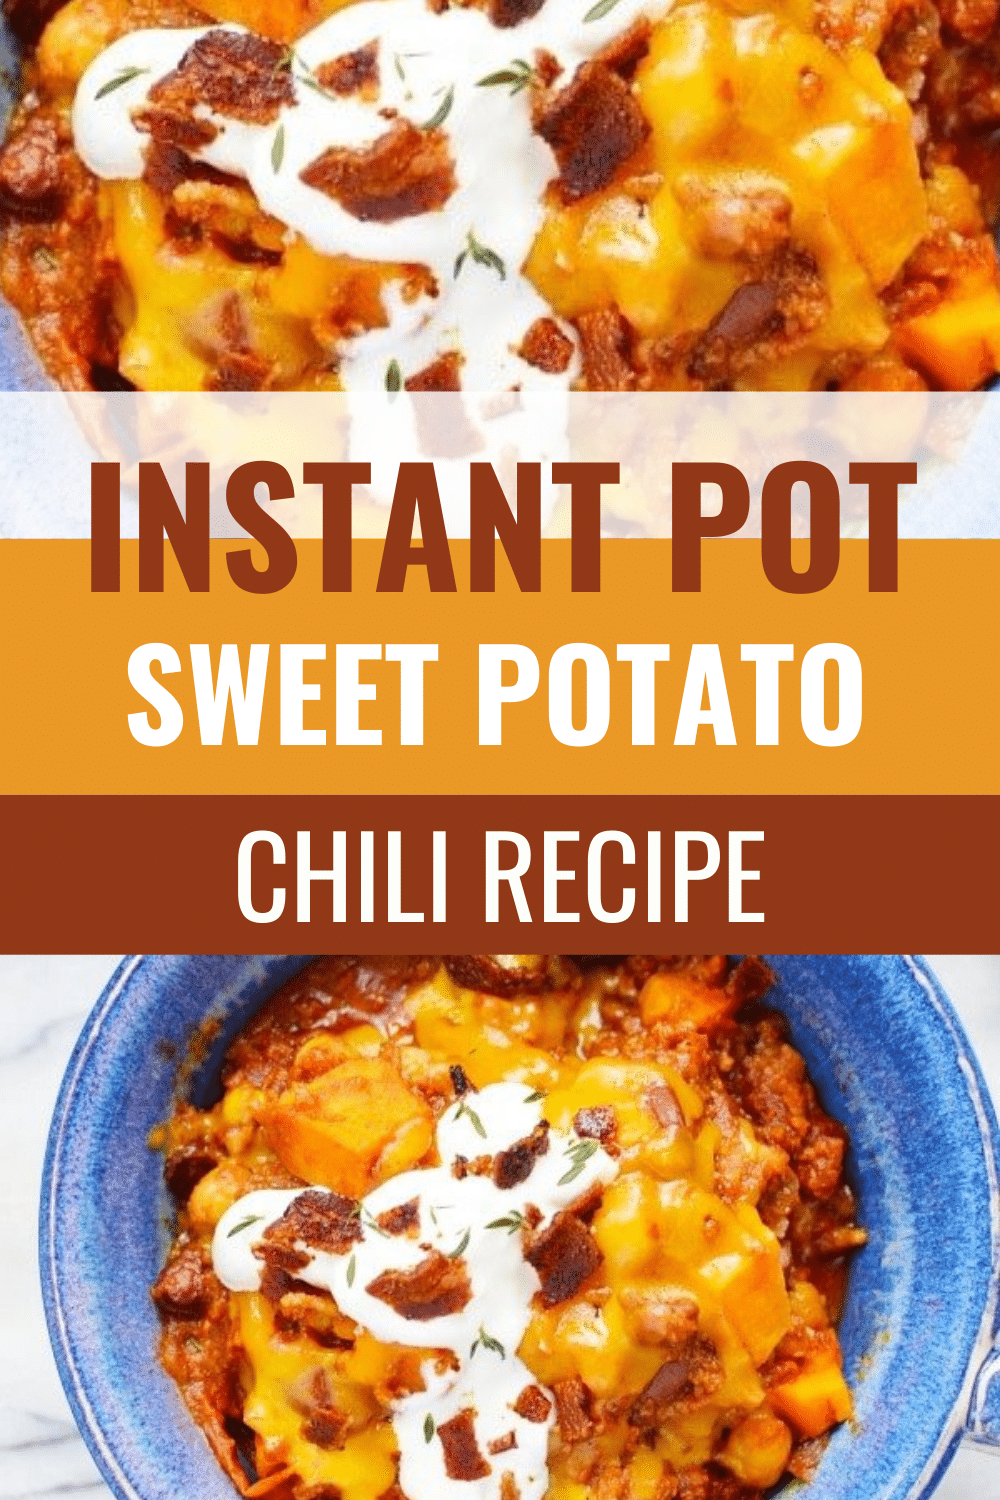 This Instant Pot Sweet Potato Chili has a couple of unique ingredients that help this chili recipe stand out from the pack. It doesn't hurt that it's pretty darn good for you too! #instantpot #pressurecooker #sweetpotato #chili #comfortfood via @wondermomwannab